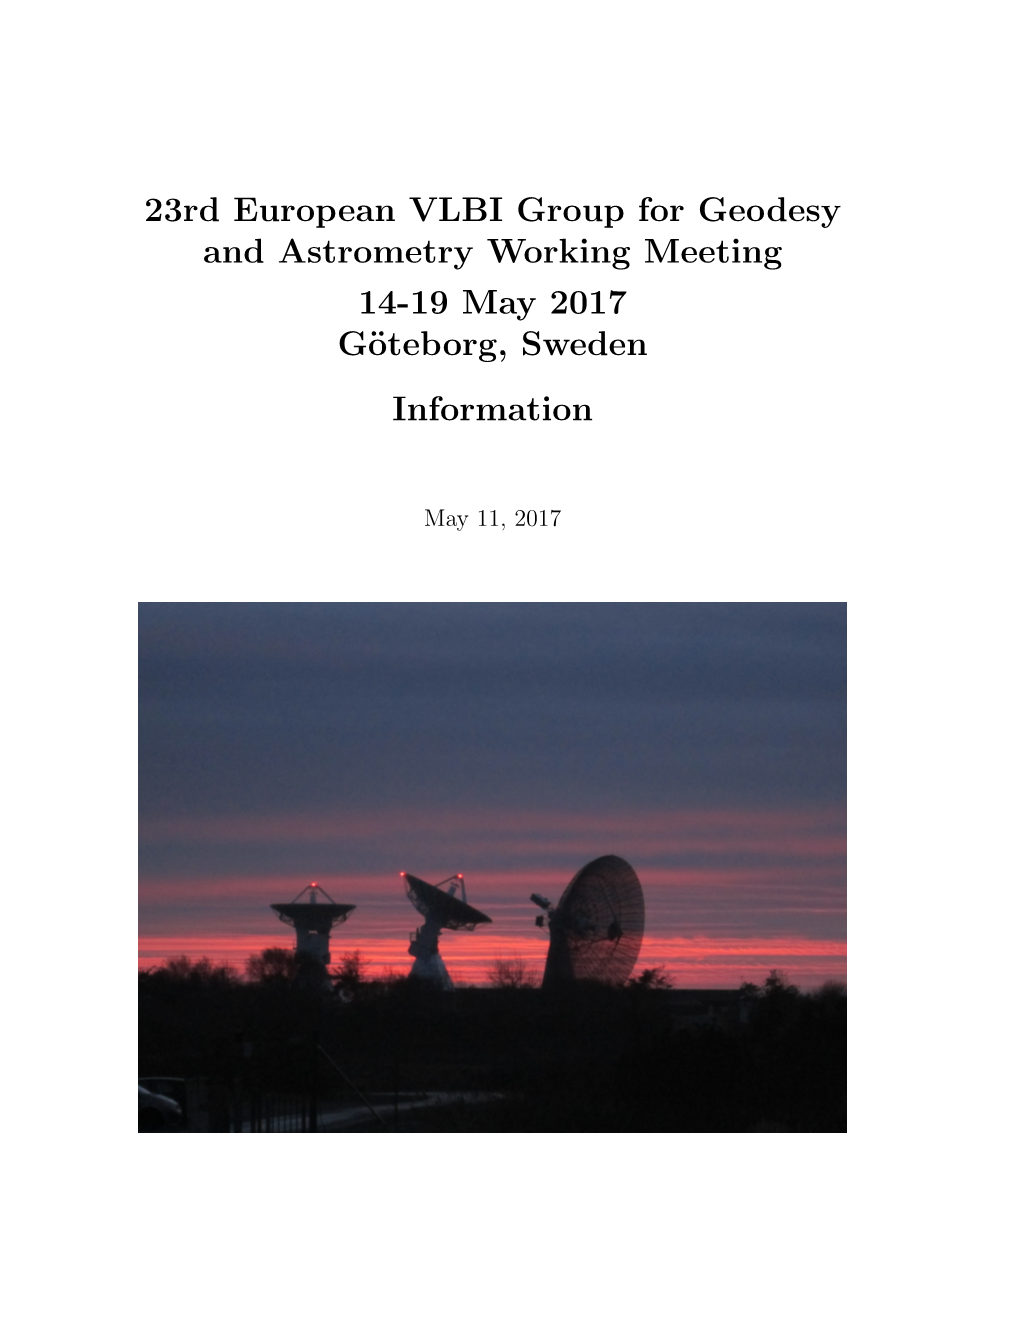 23Rd European VLBI Group for Geodesy and Astrometry Working Meeting 14-19 May 2017 G¨Oteborg, Sweden Information